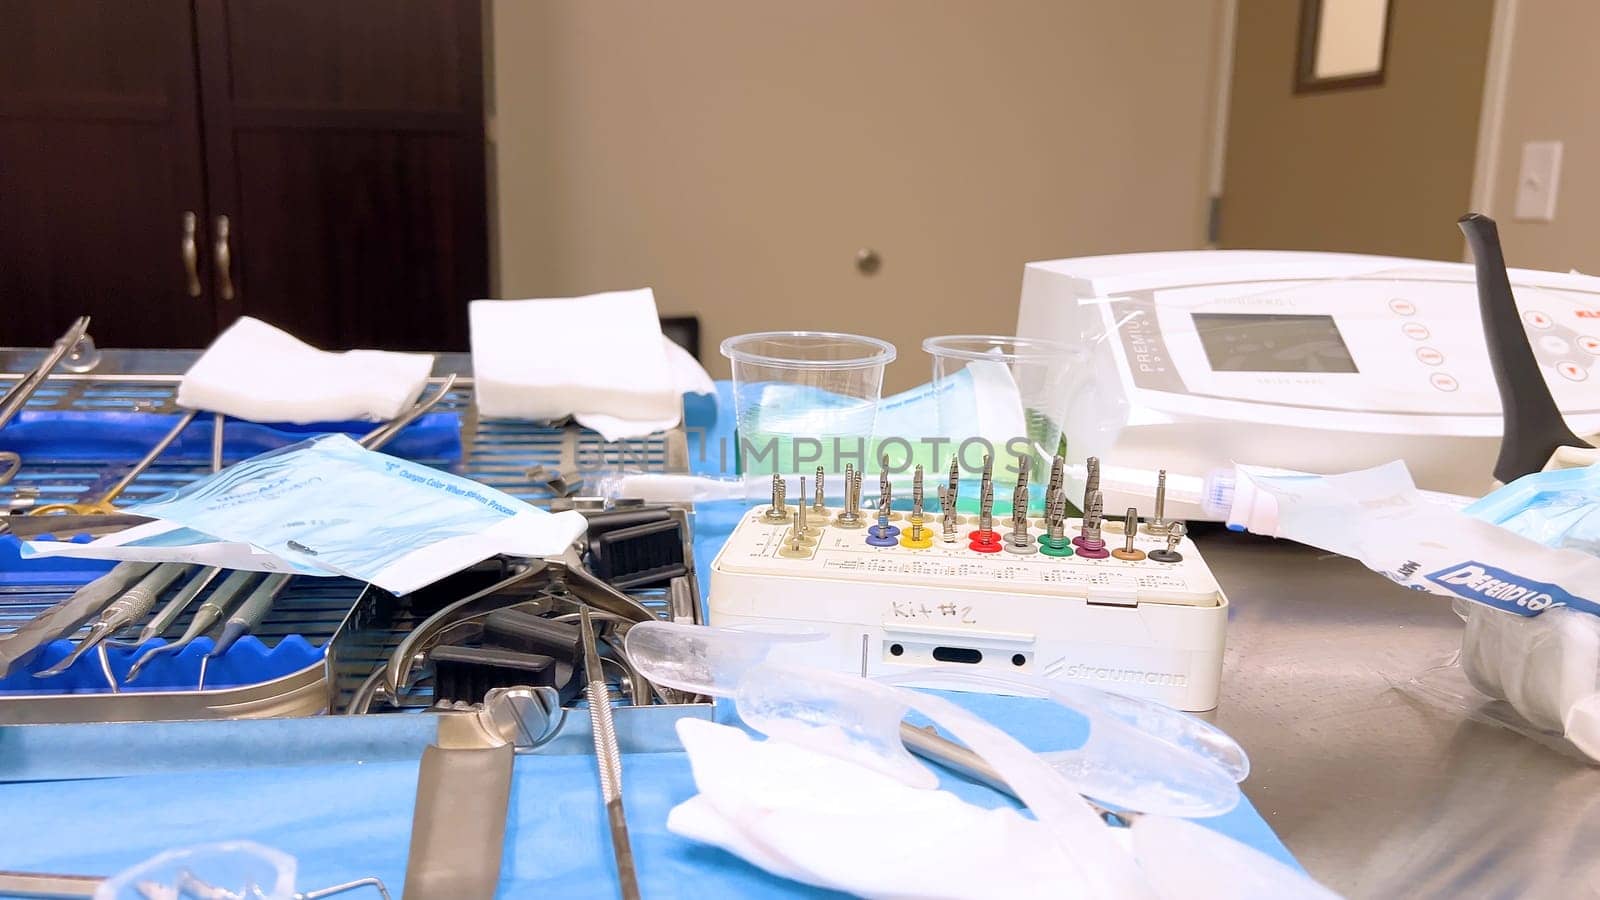 Denver, Colorado, USA-June 10, 2024-Slow motion-A table set with various sterilized surgical instruments, ready for a medical implant procedure. The organized setup includes forceps, scalpels, gauze, and syringes, emphasizing the precision and cleanliness required for implant surgery.